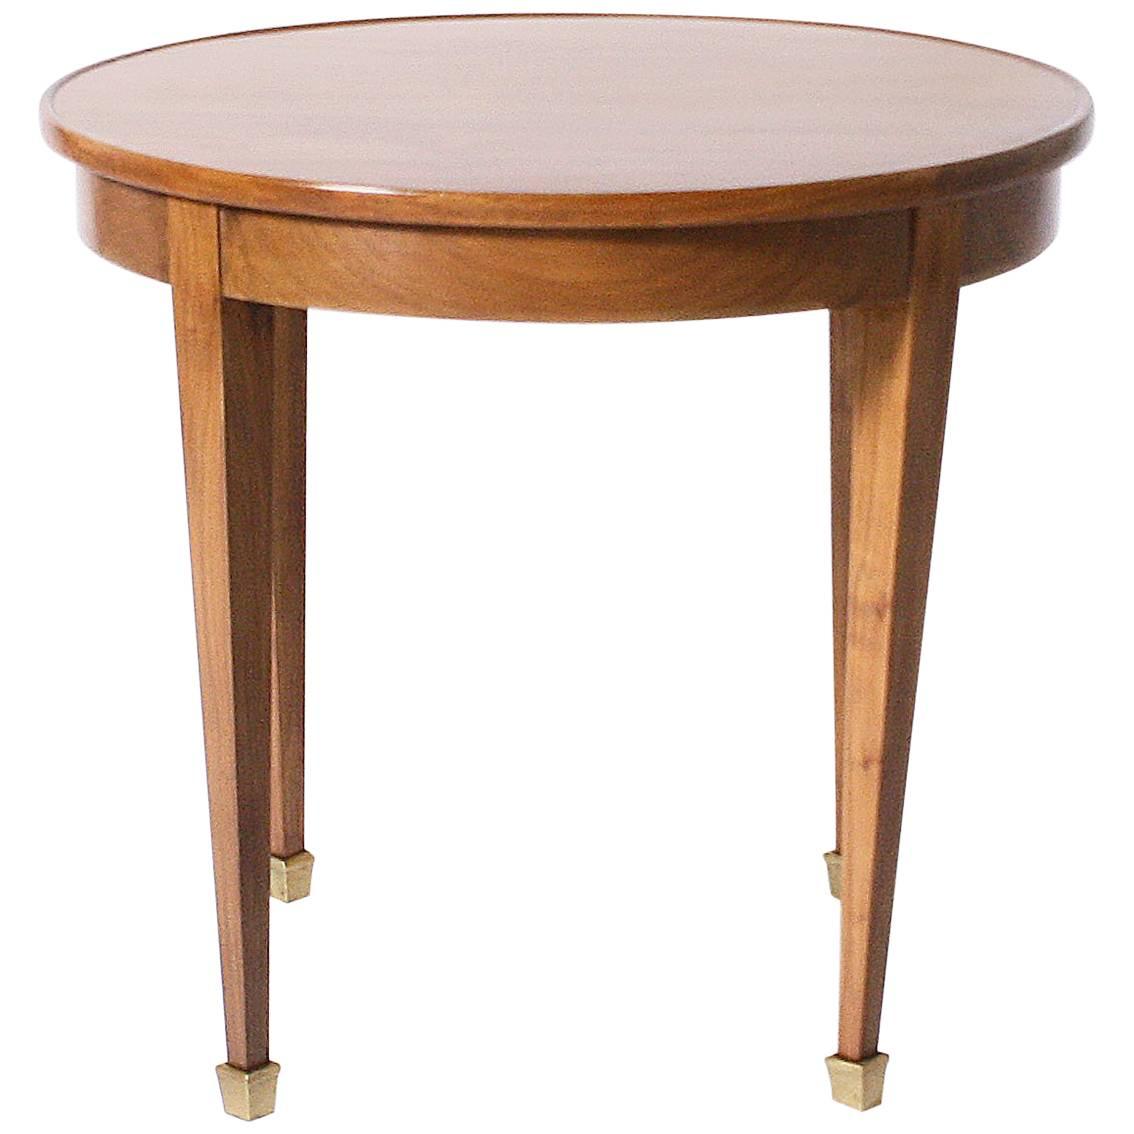 Small Round Merisier Cigarette Table with Brass Sabots, circa 1940